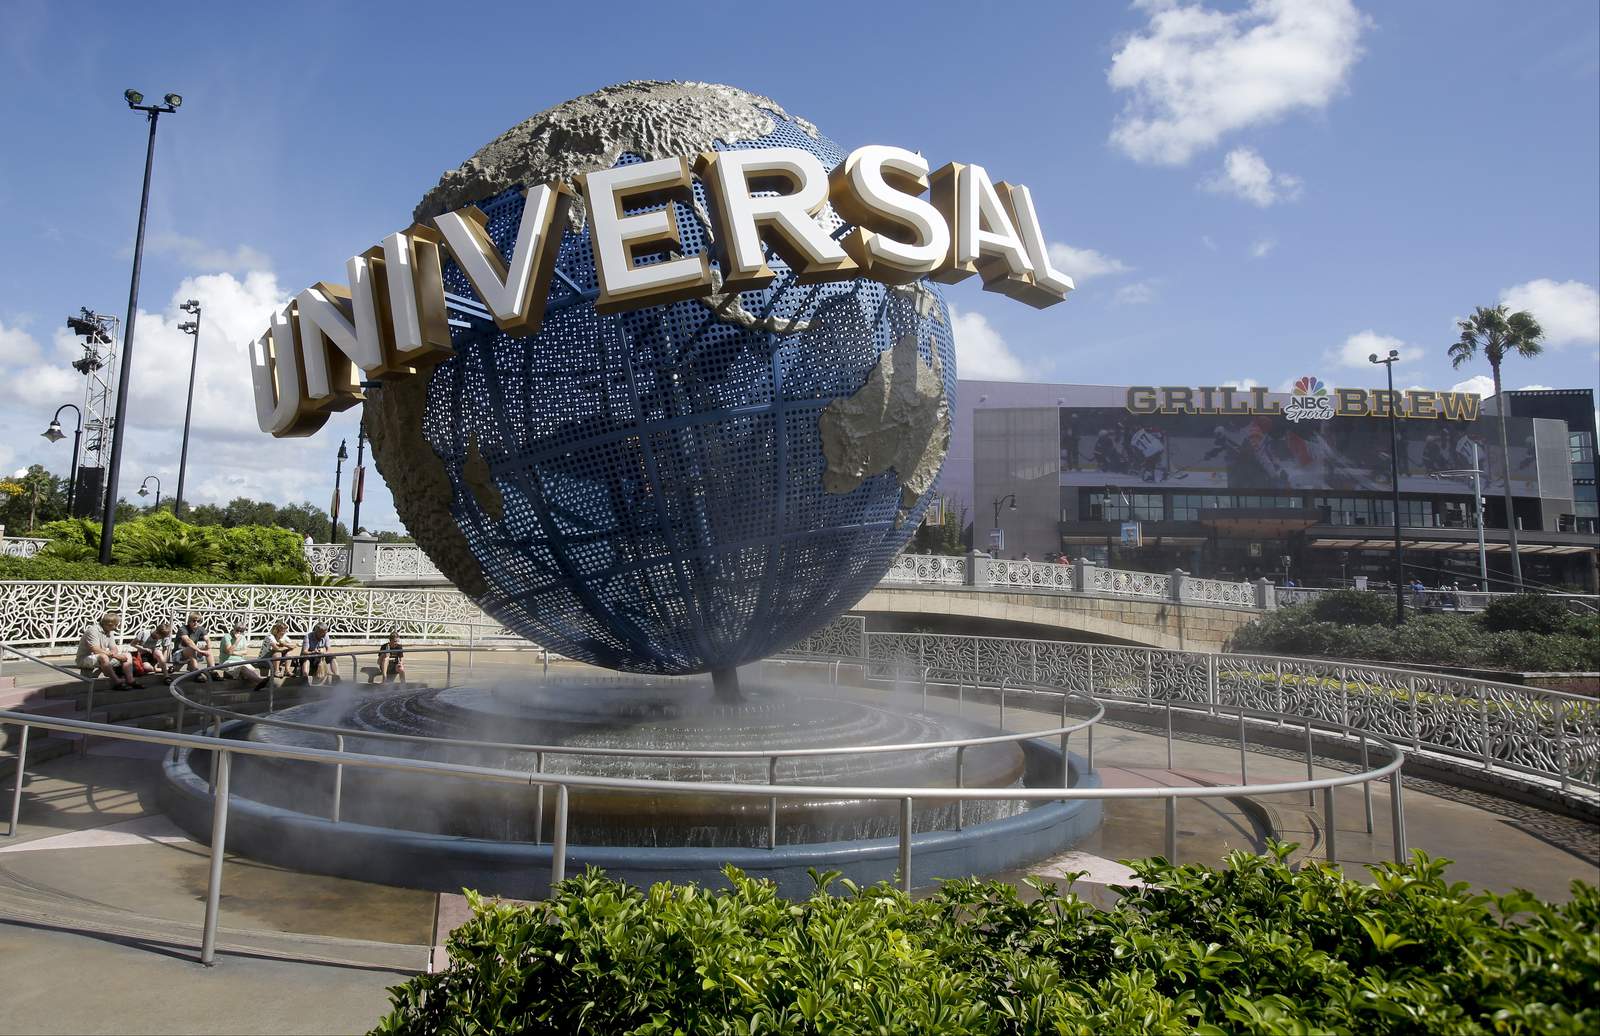 Universal Orlando to check temperatures of all employees to prevent spread of COVID-19